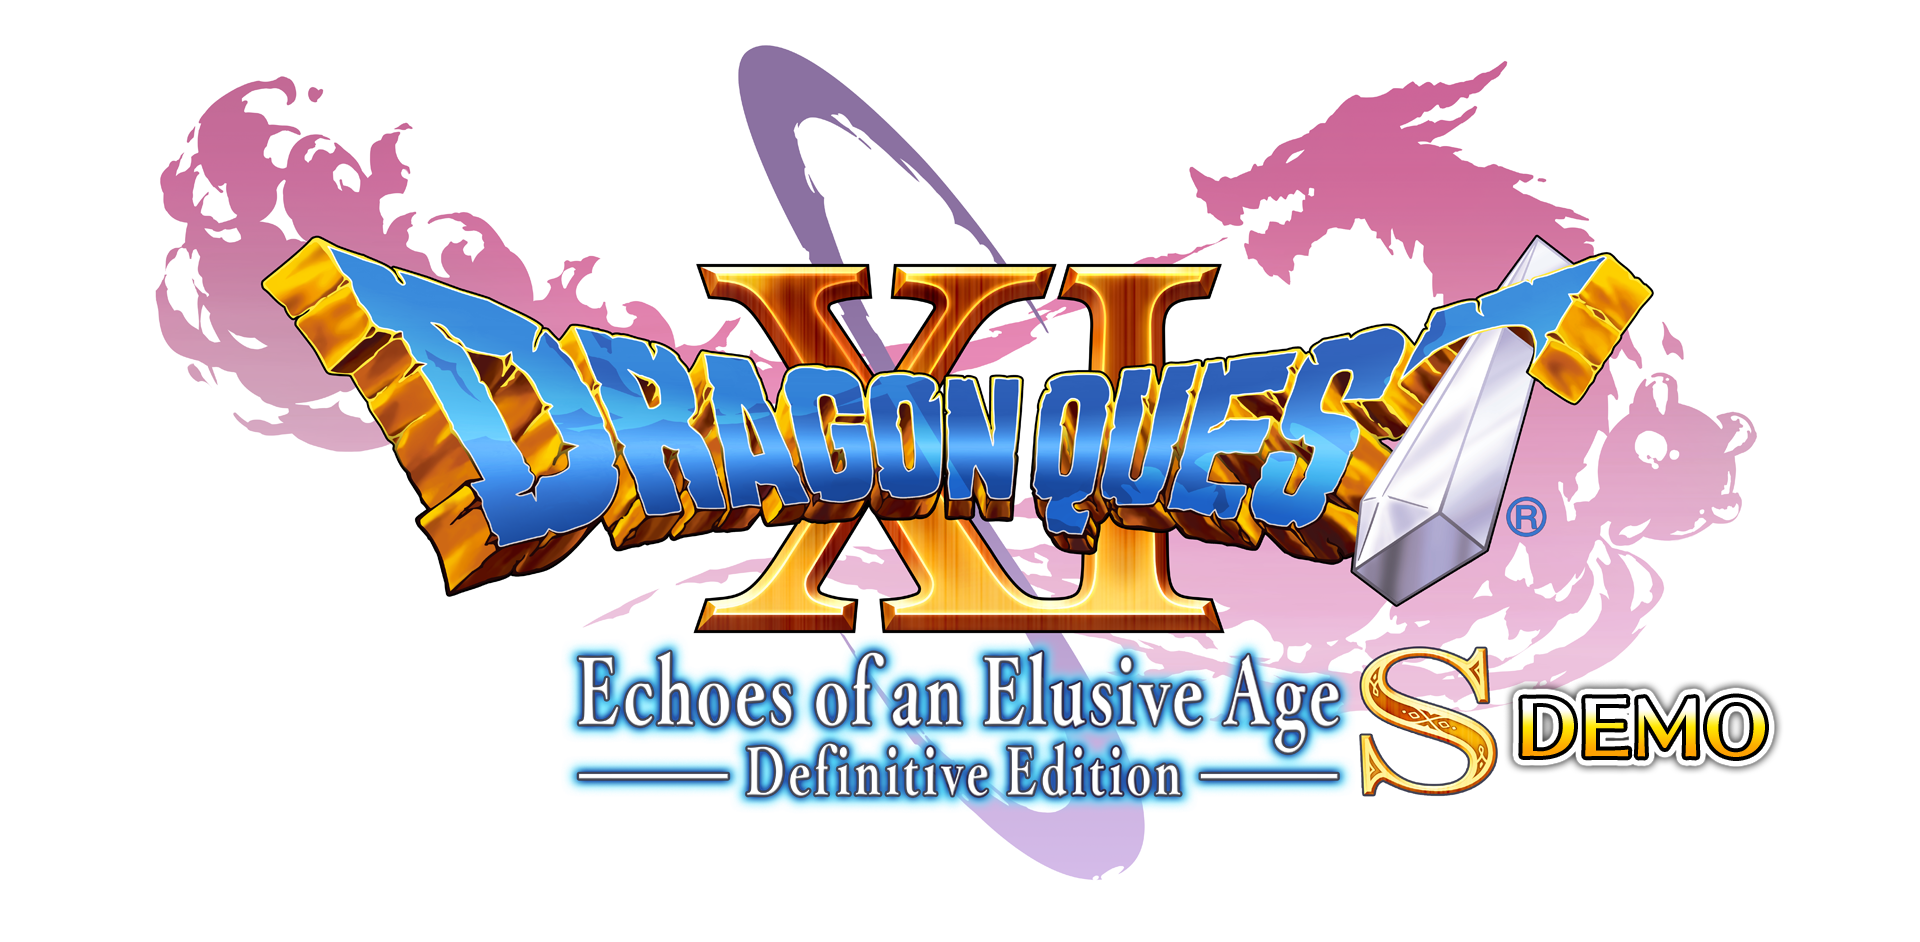 dragon quest 11 switch buy